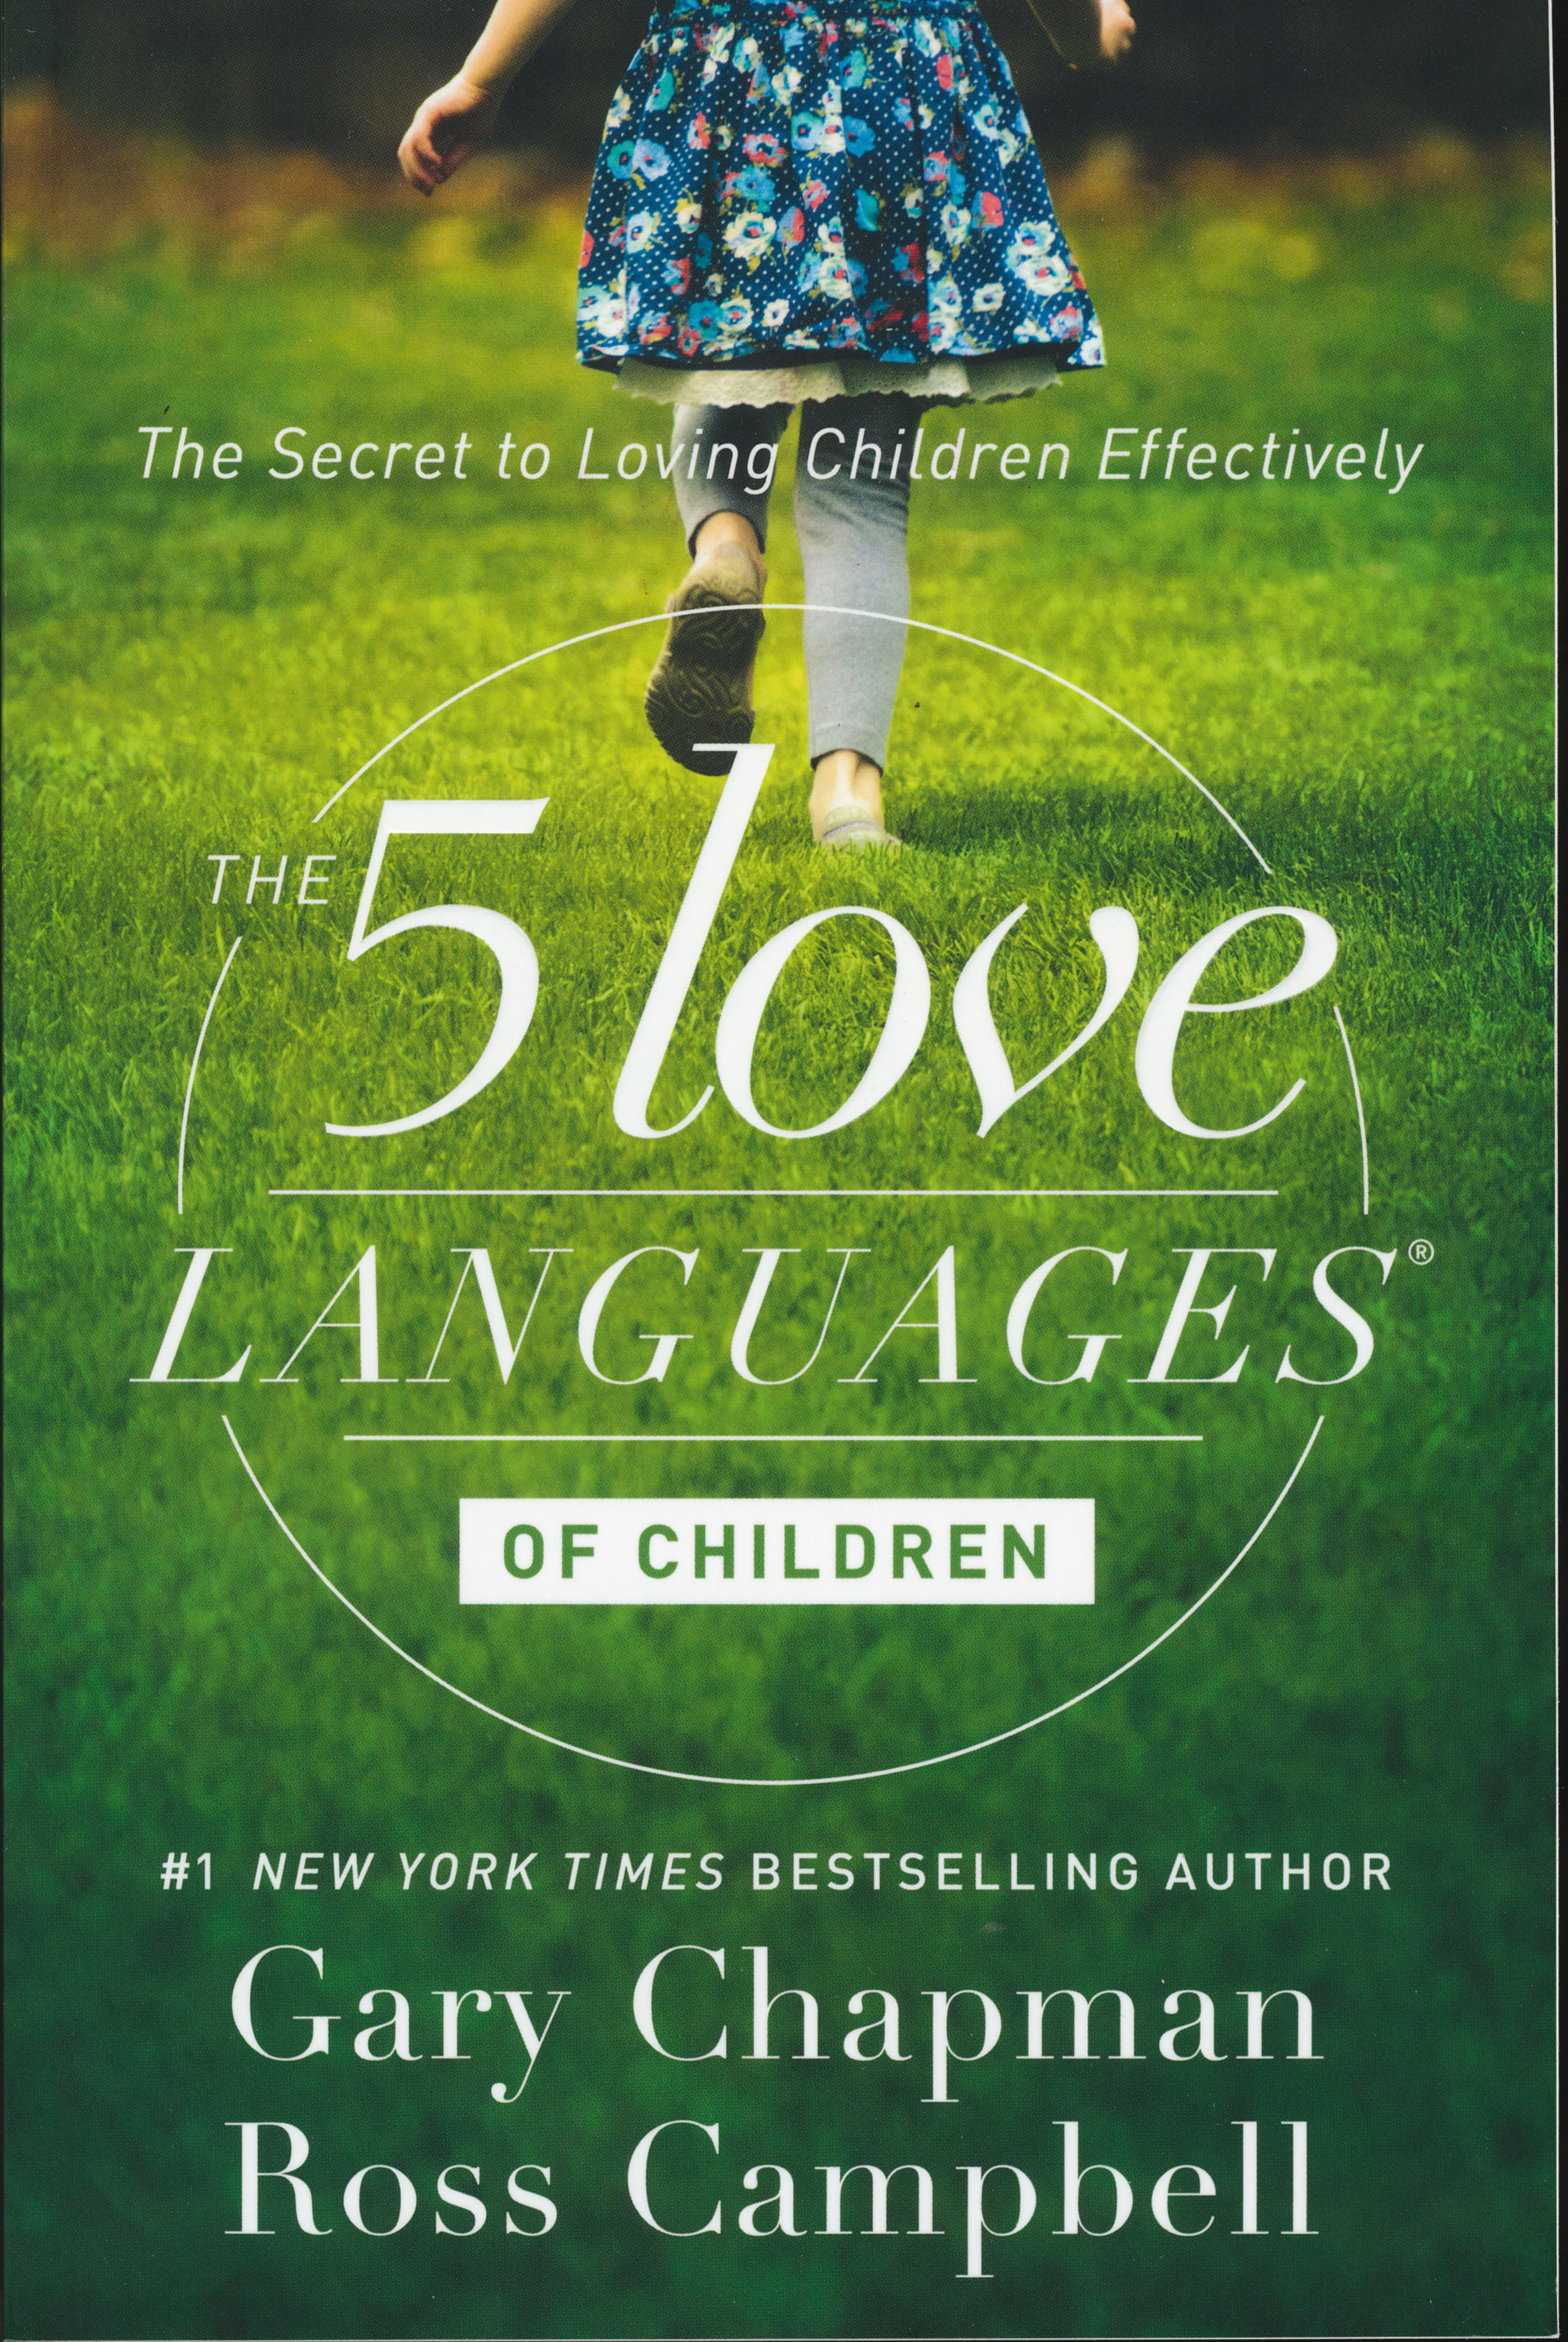 The 5 Love Languages of Children: The Secret to Loving Children Effectively by Gary Chapman and Ross Campbell 108-9780802412850